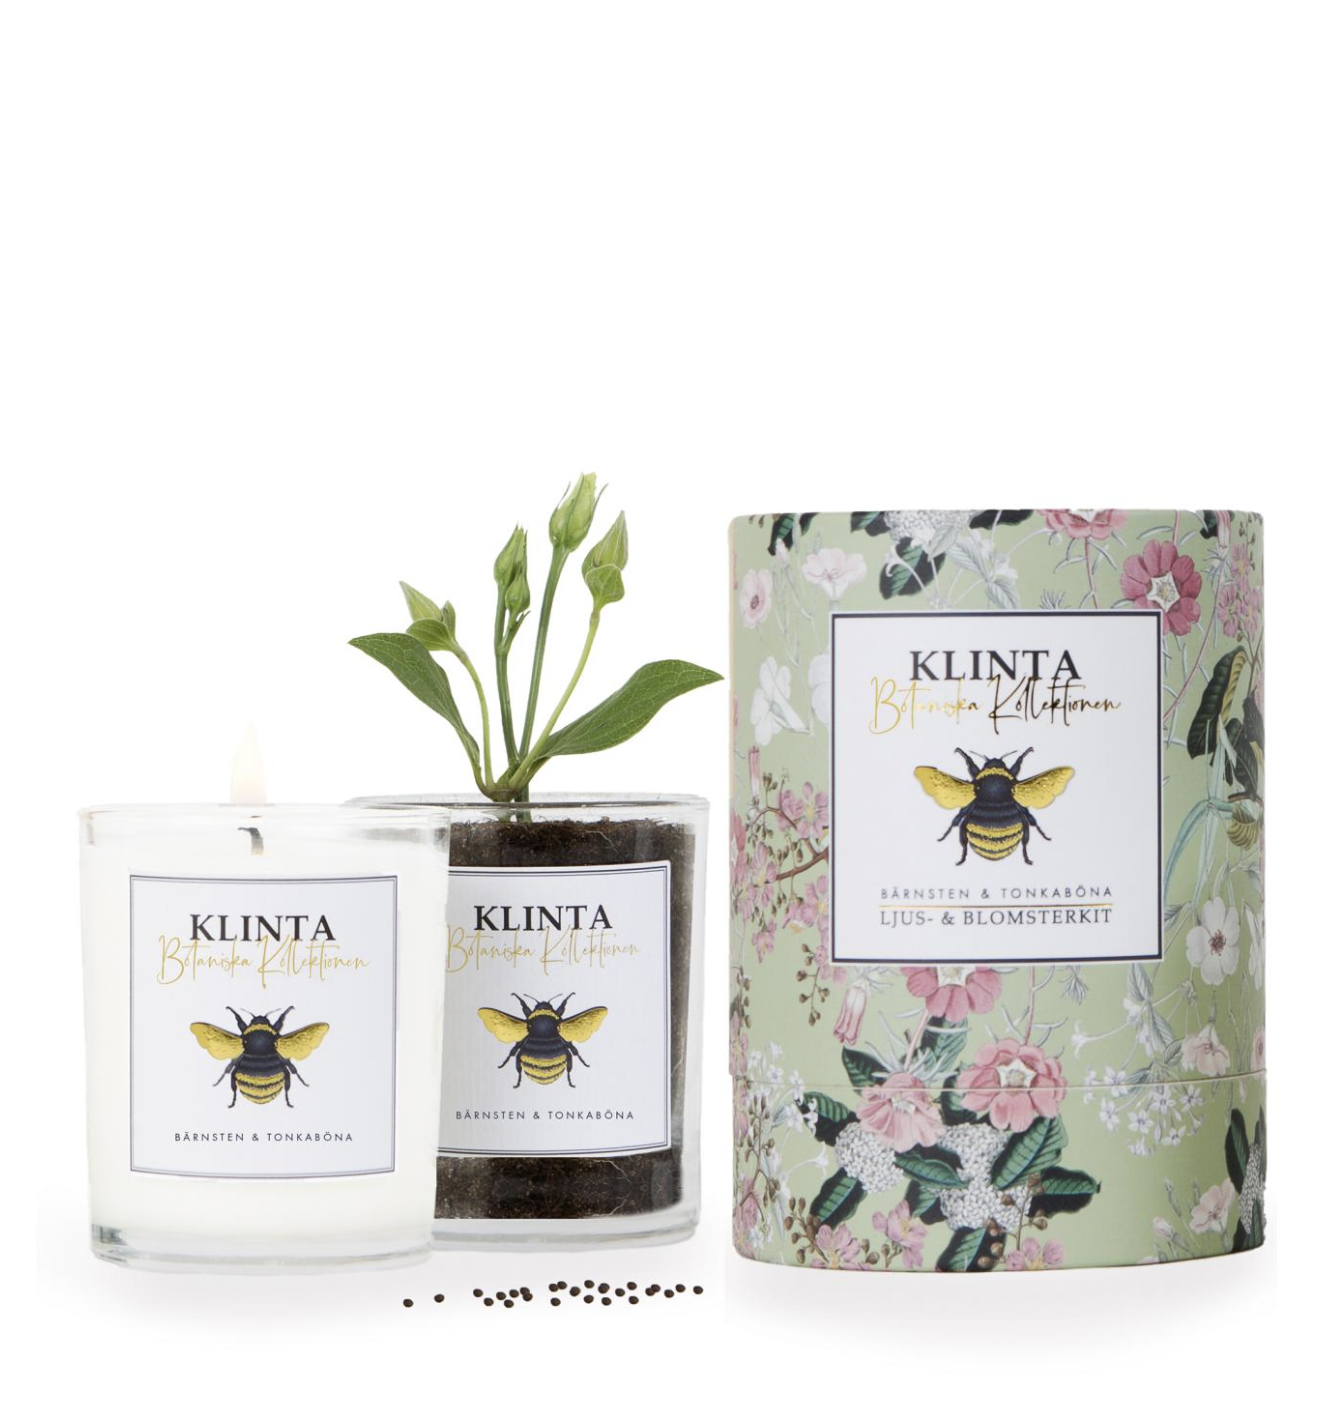 Amber & Tonka Bean Scented Candle and Flower Kit in one!